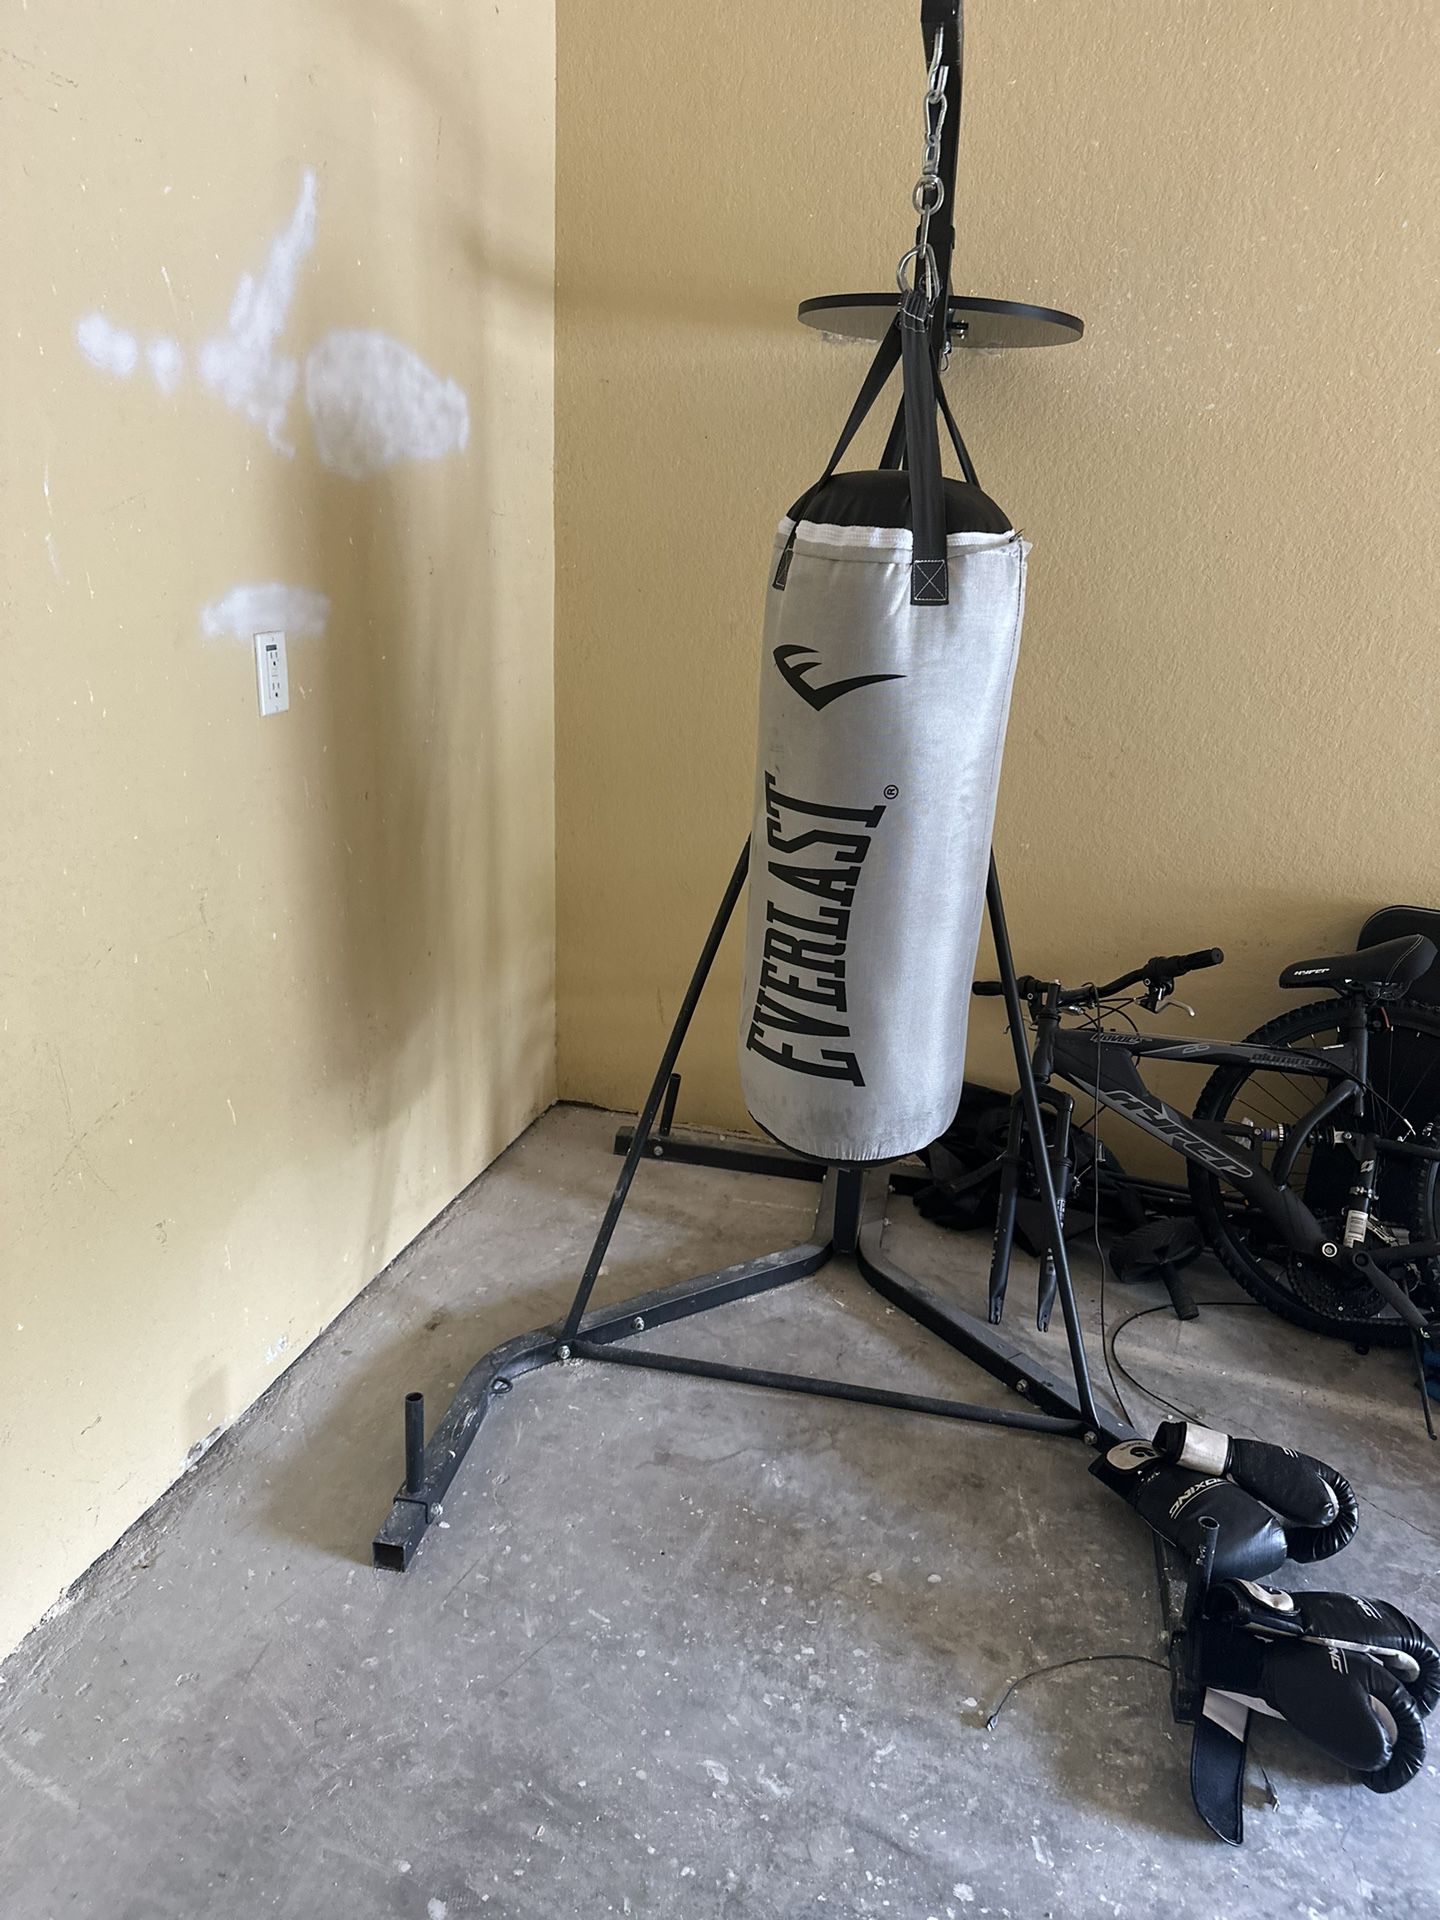 Everlast Punching Bag With Metal Stand